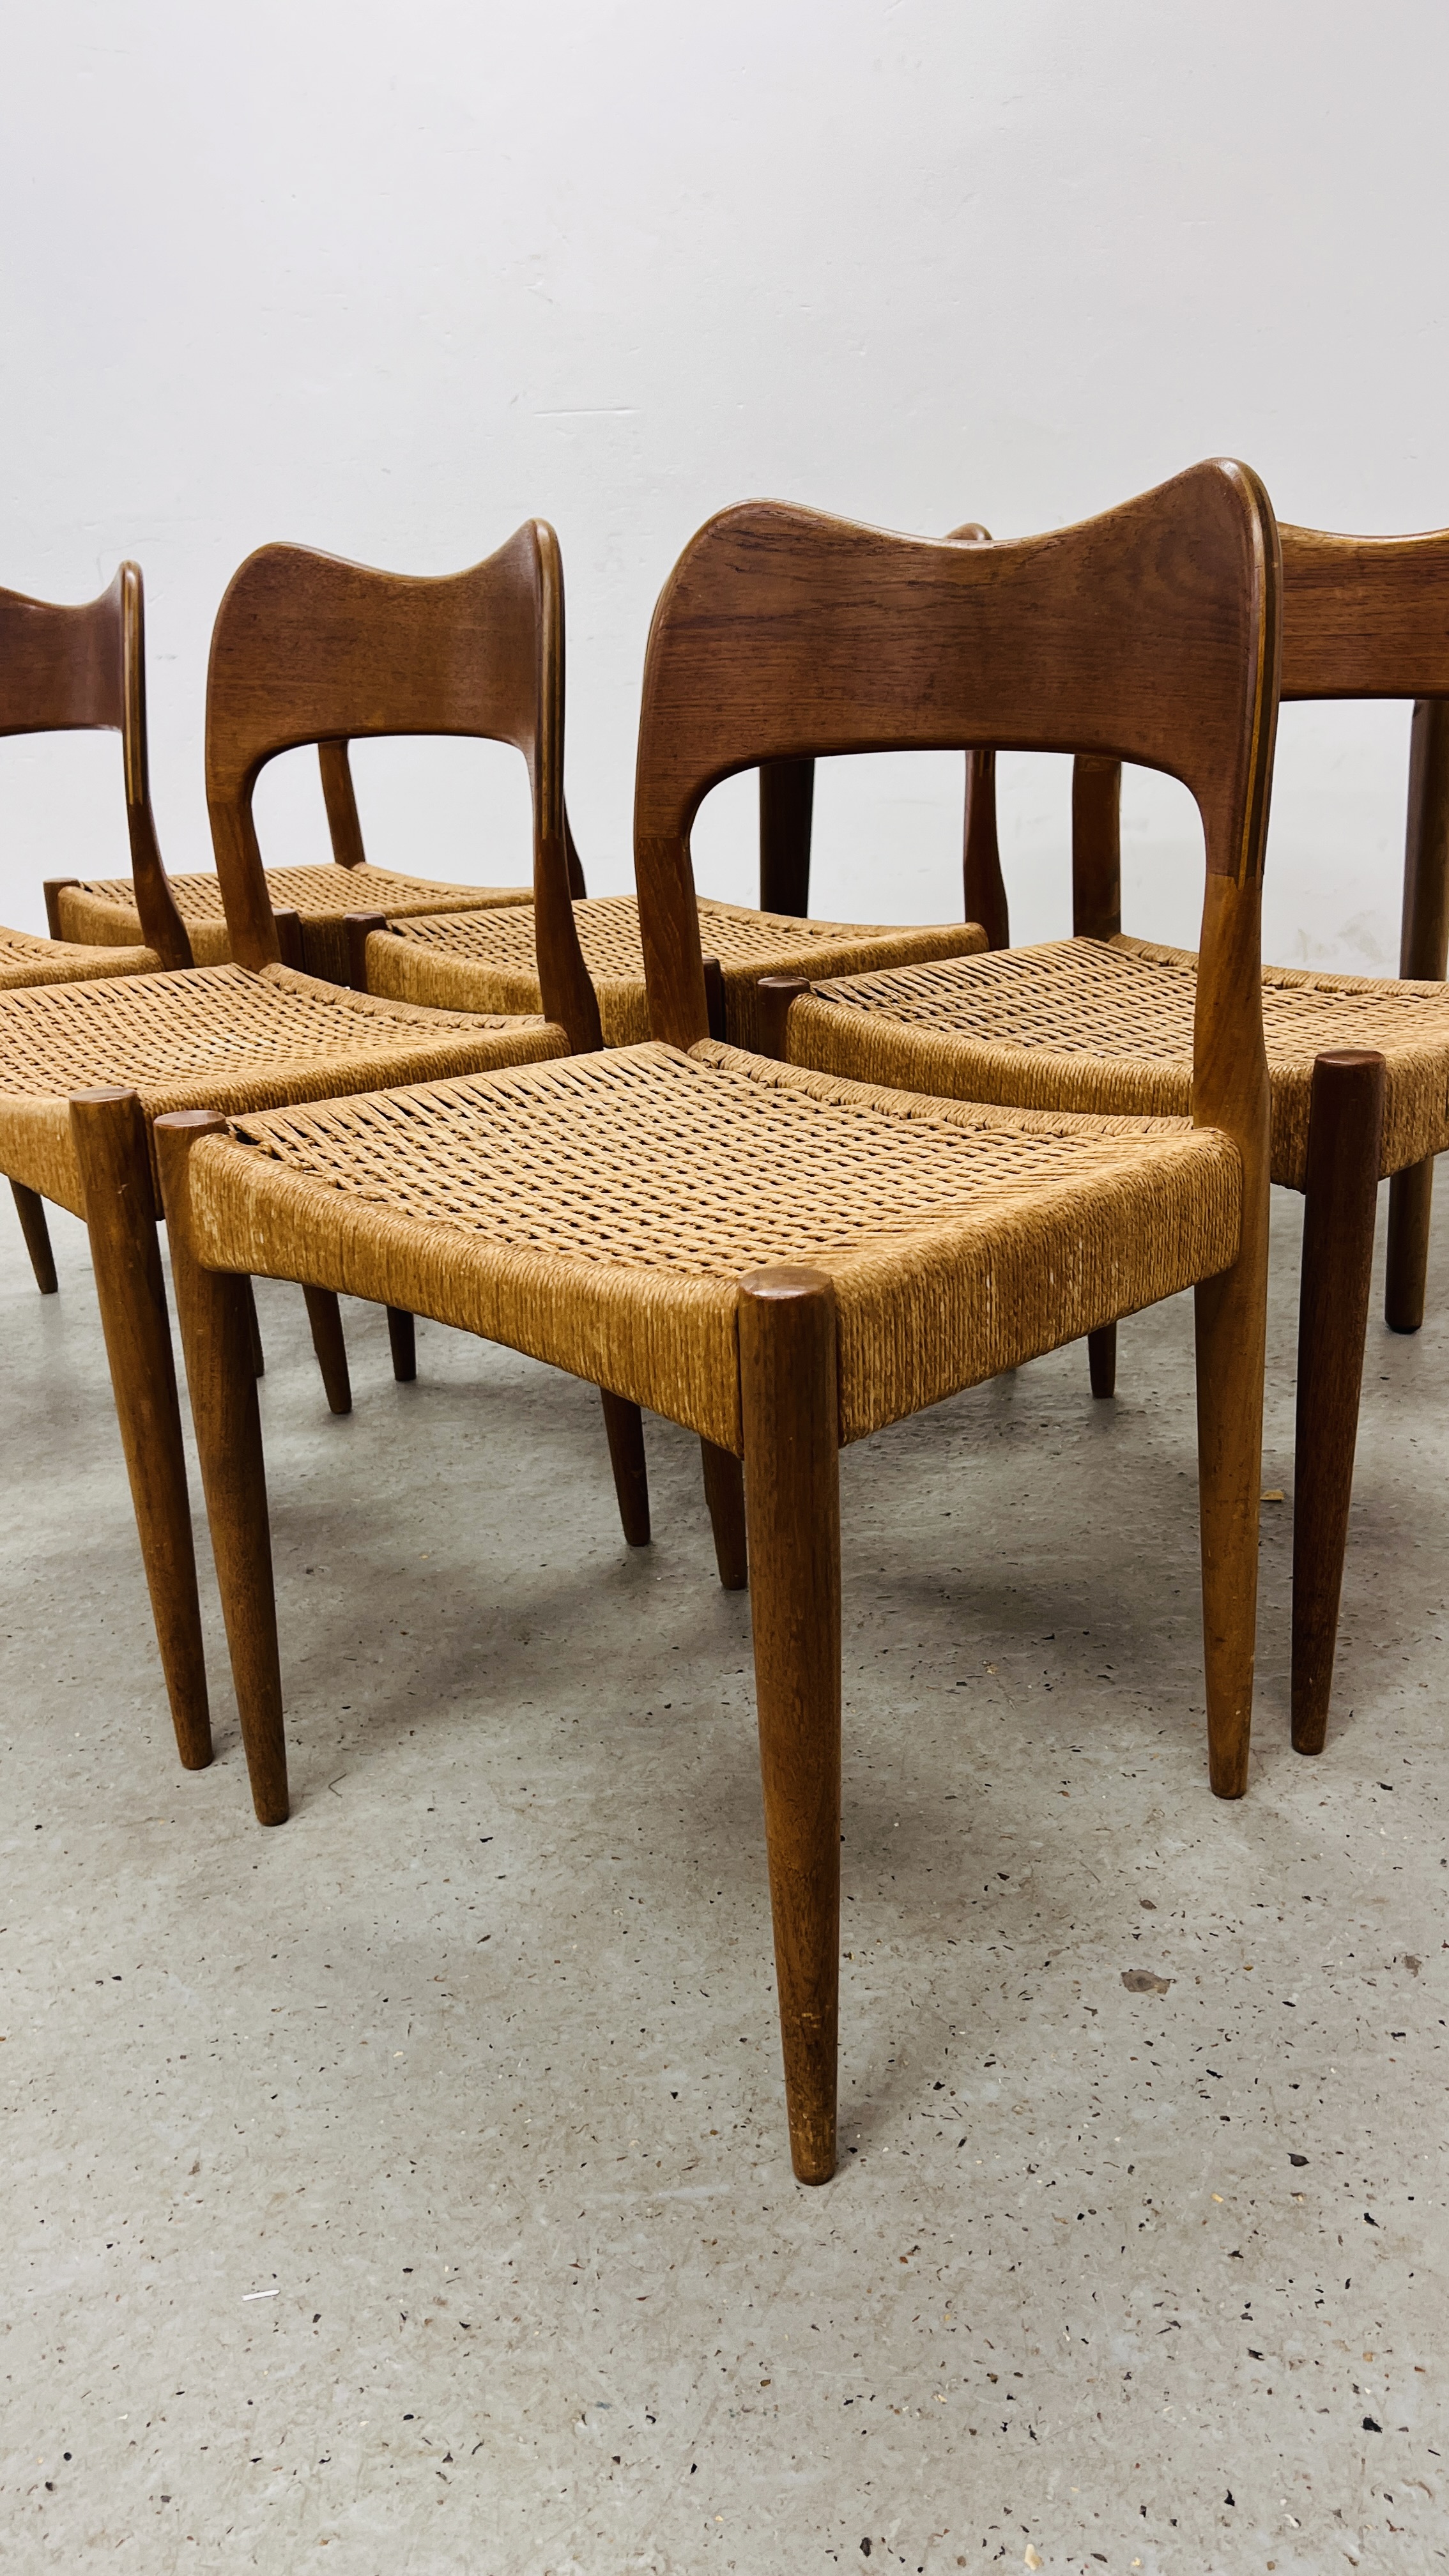 DANISH MID-CENTURY TEAK EXTENDING CIRCULAR DINING TABLE (2 LEAVES) ALONG WITH A SET OF SIX DANISH - Image 3 of 23